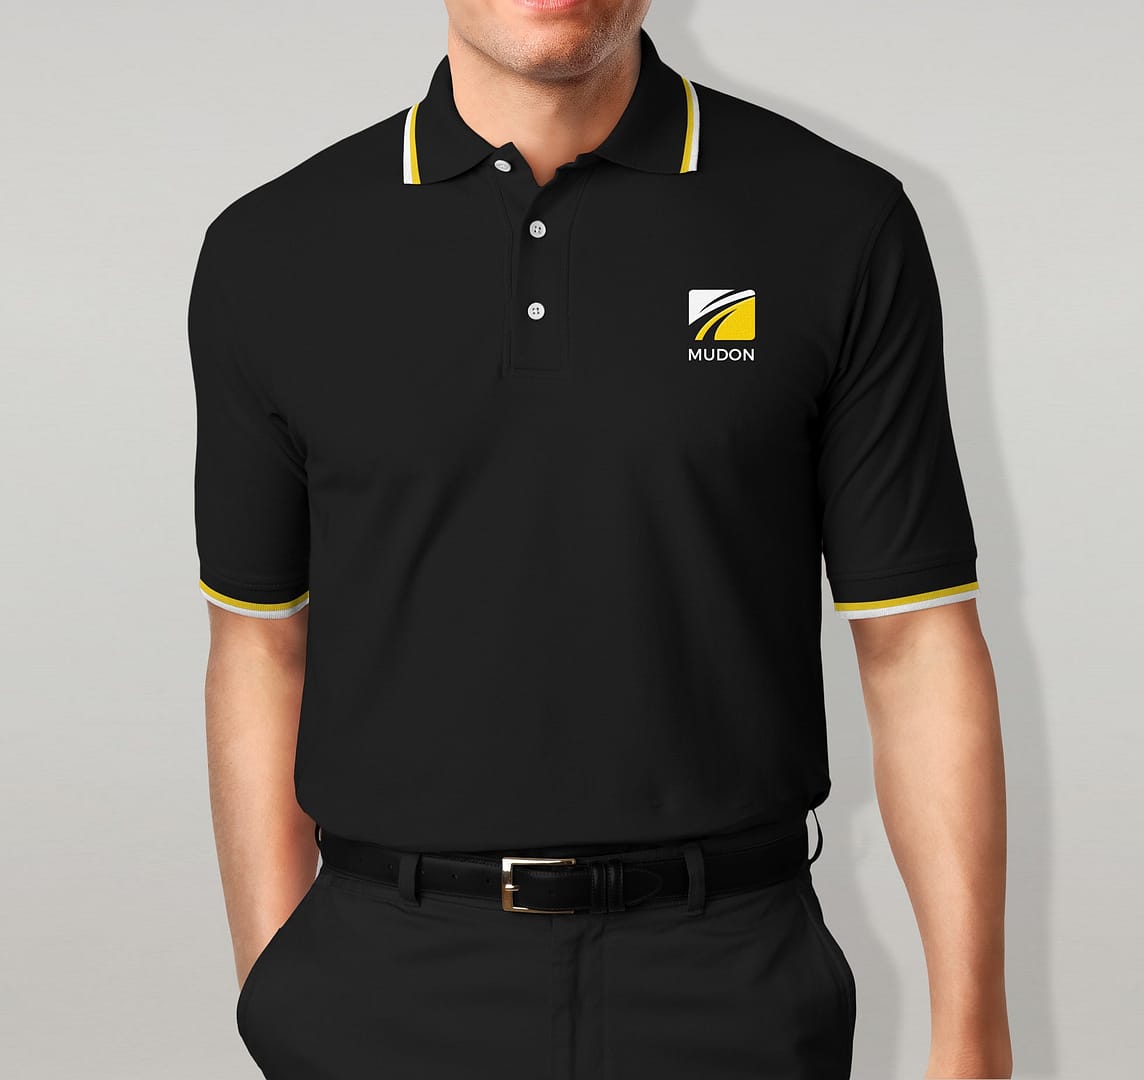 Branded Polo Shirt Design for Construction Company